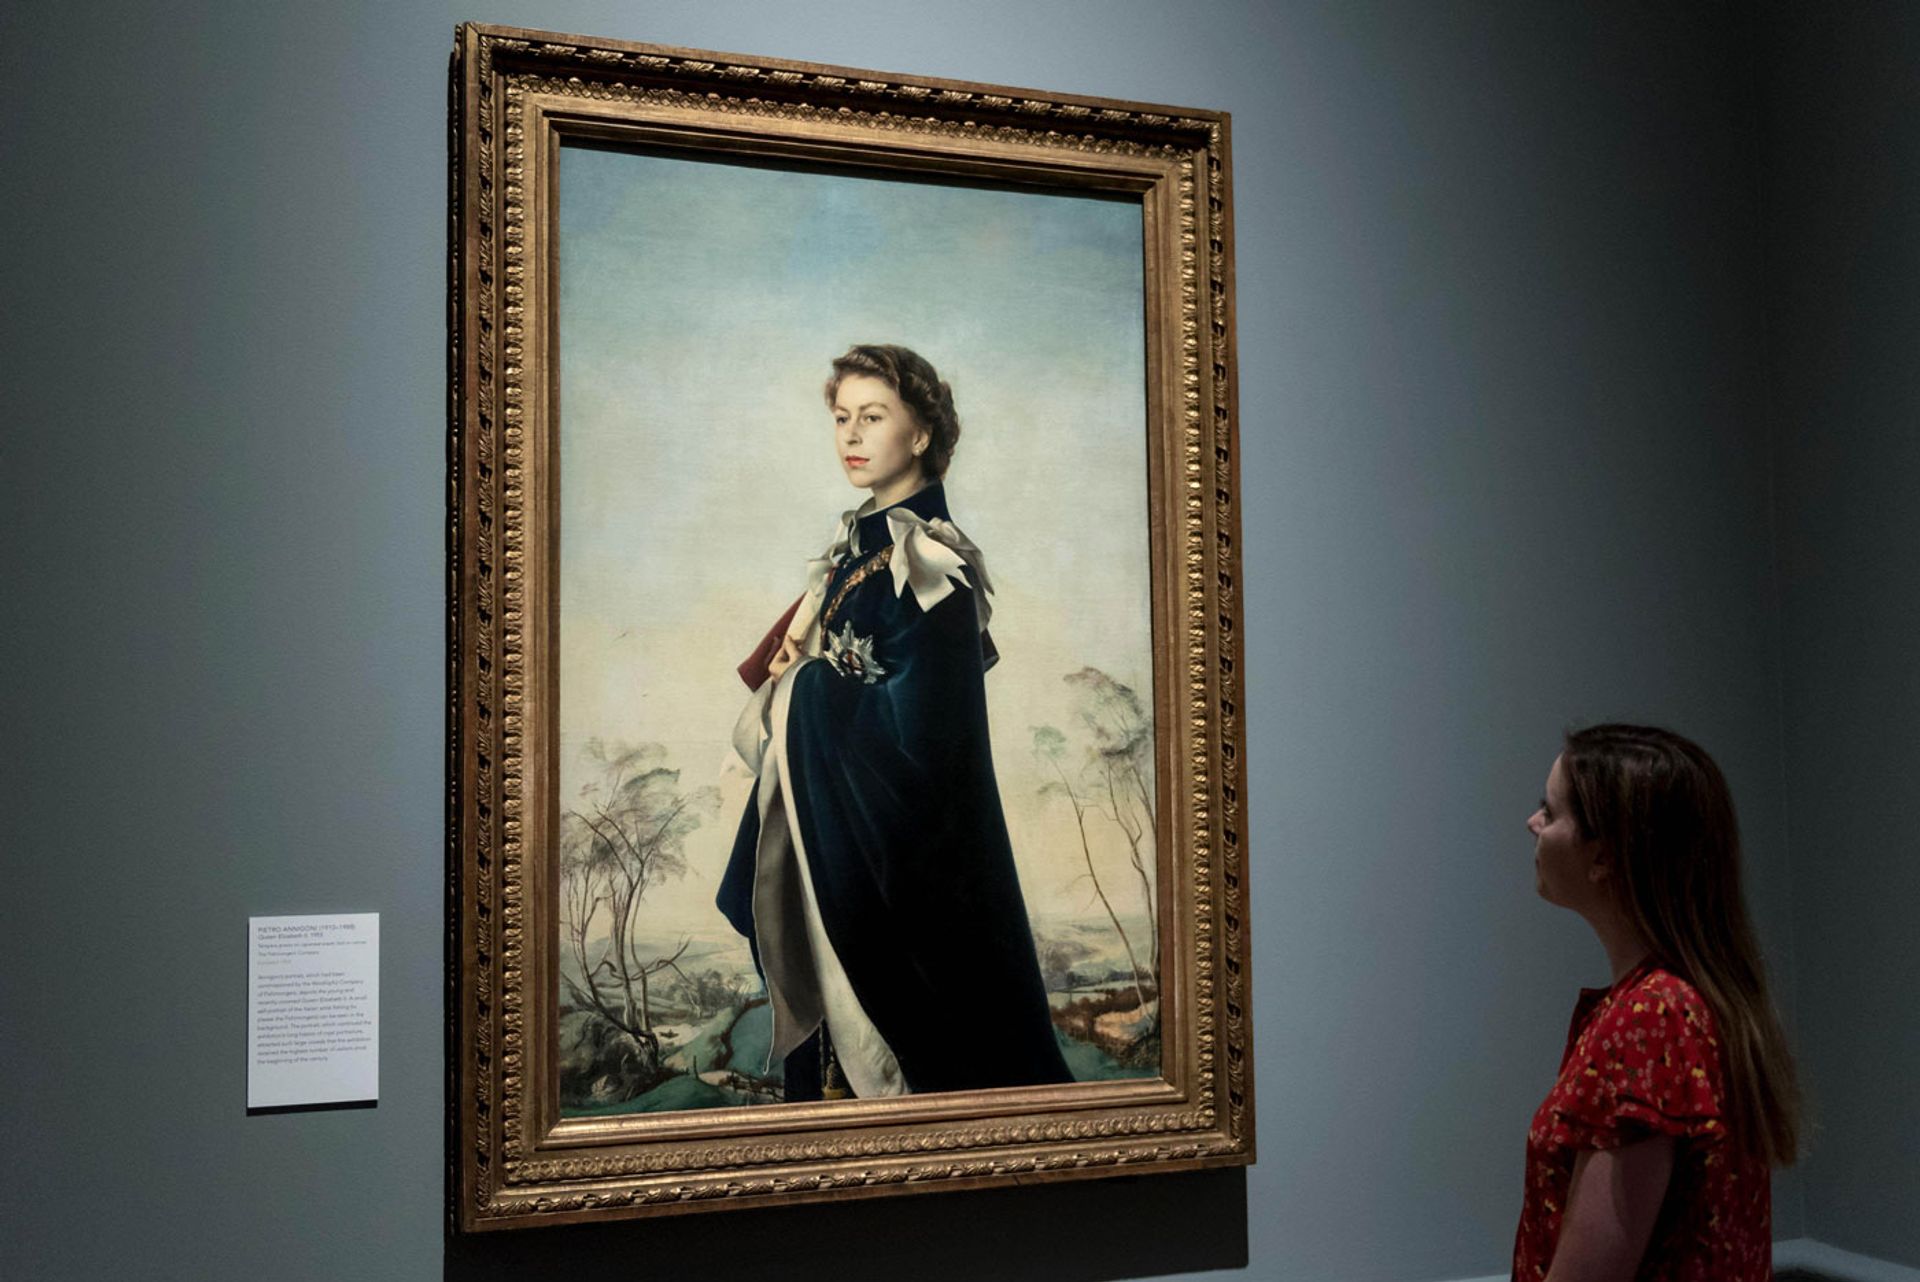 Pietro Annigoni's Queen Elizabeth II (1955), on show at the 250th Summer Exhibition at the Royal Academy of Arts, London, in 2018
© Pietro Annigoni, All rights reserved. DACS 2022. Photograph: Stephen Chung / Alamy Stock Photo